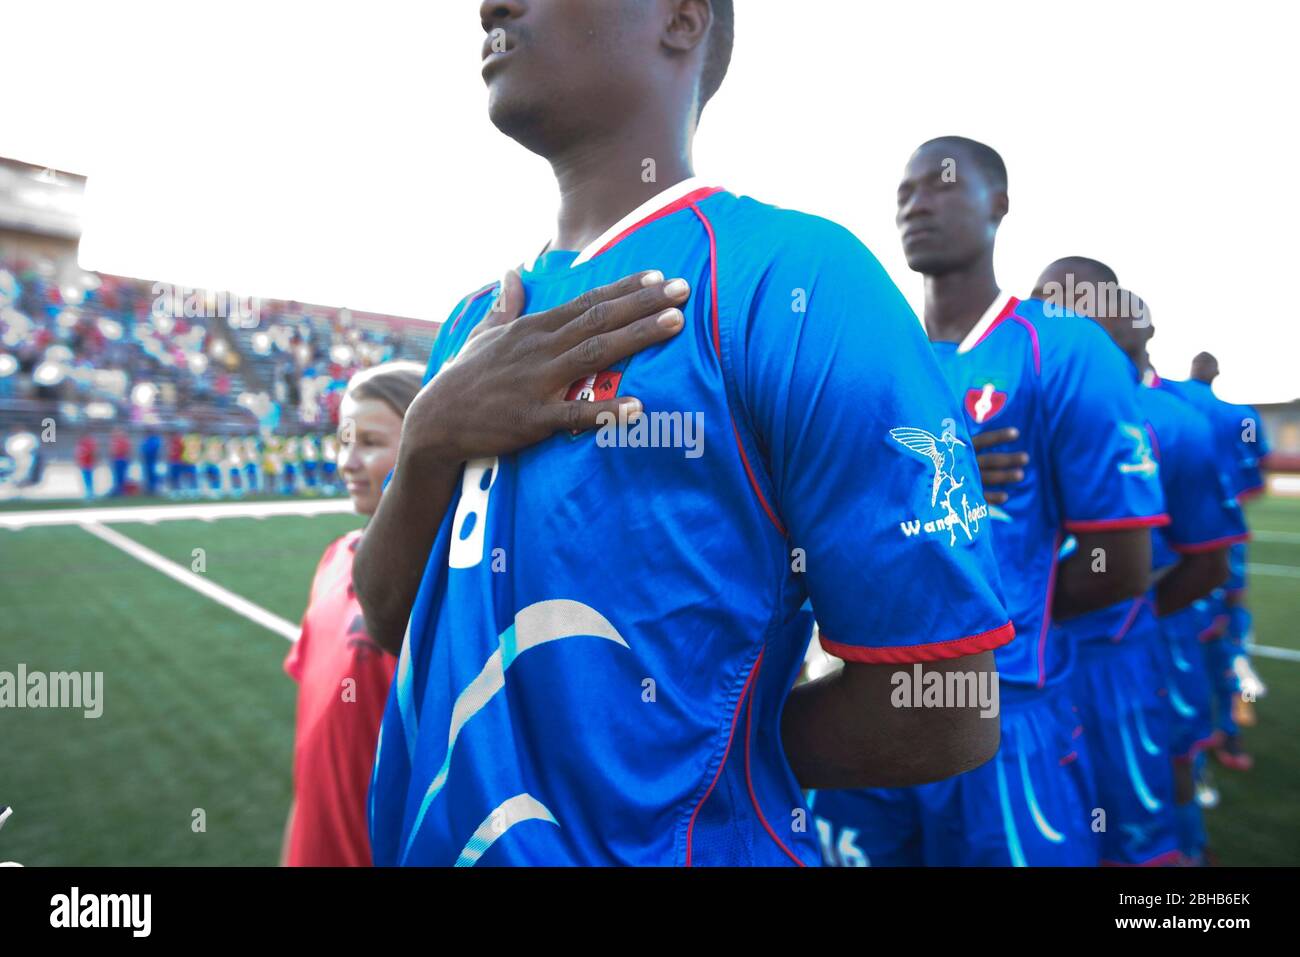 Austin, Texas USA, April 28, 2010: Members of the Haitian national soccer team place their hands over their heart as their national anthem plays before an exhibition match with the Austin Aztek professional soccer team. The Haitians' Port au Prince facility was decimated by the January 12th earthquake and 32 team members were killed. The surviving team members accepted an offer to train for two weeks in Texas and will travel to Argentina next week for South American matchups.  ©Bob Daemmrich Stock Photo